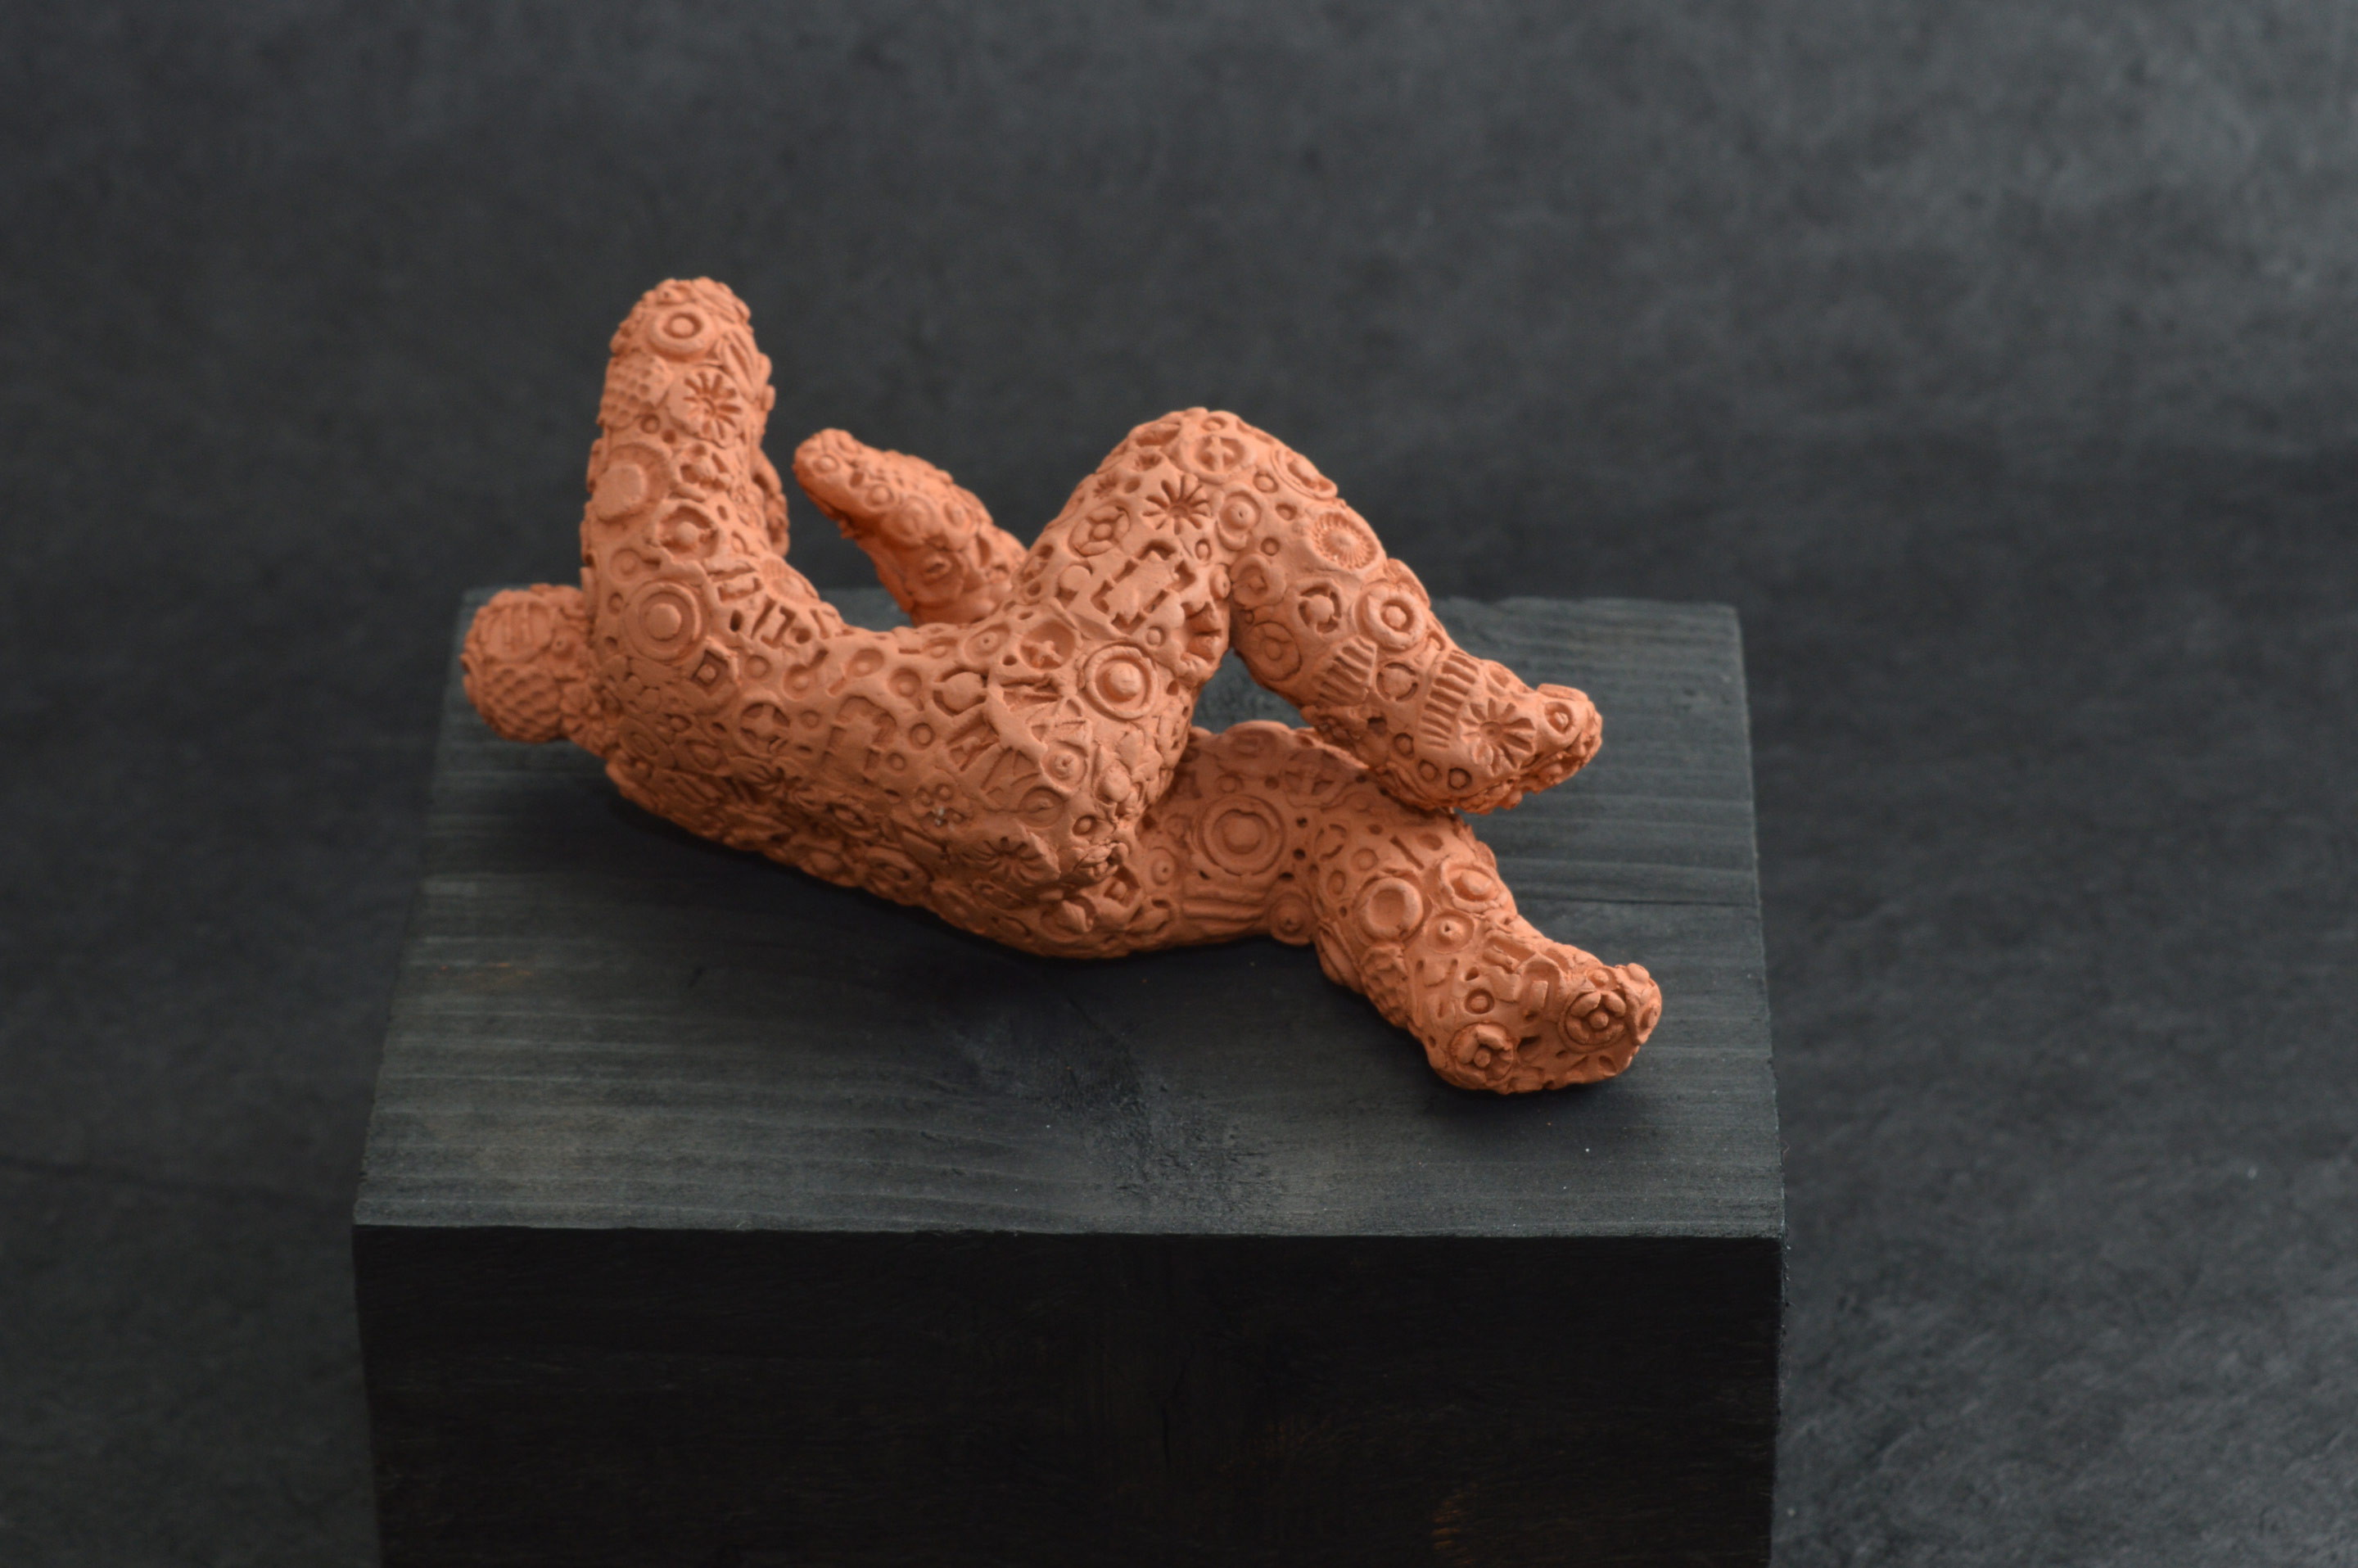 Falling Figure 04, an unglazed terracotta figure about 10cm in length encrusted with embossed forms